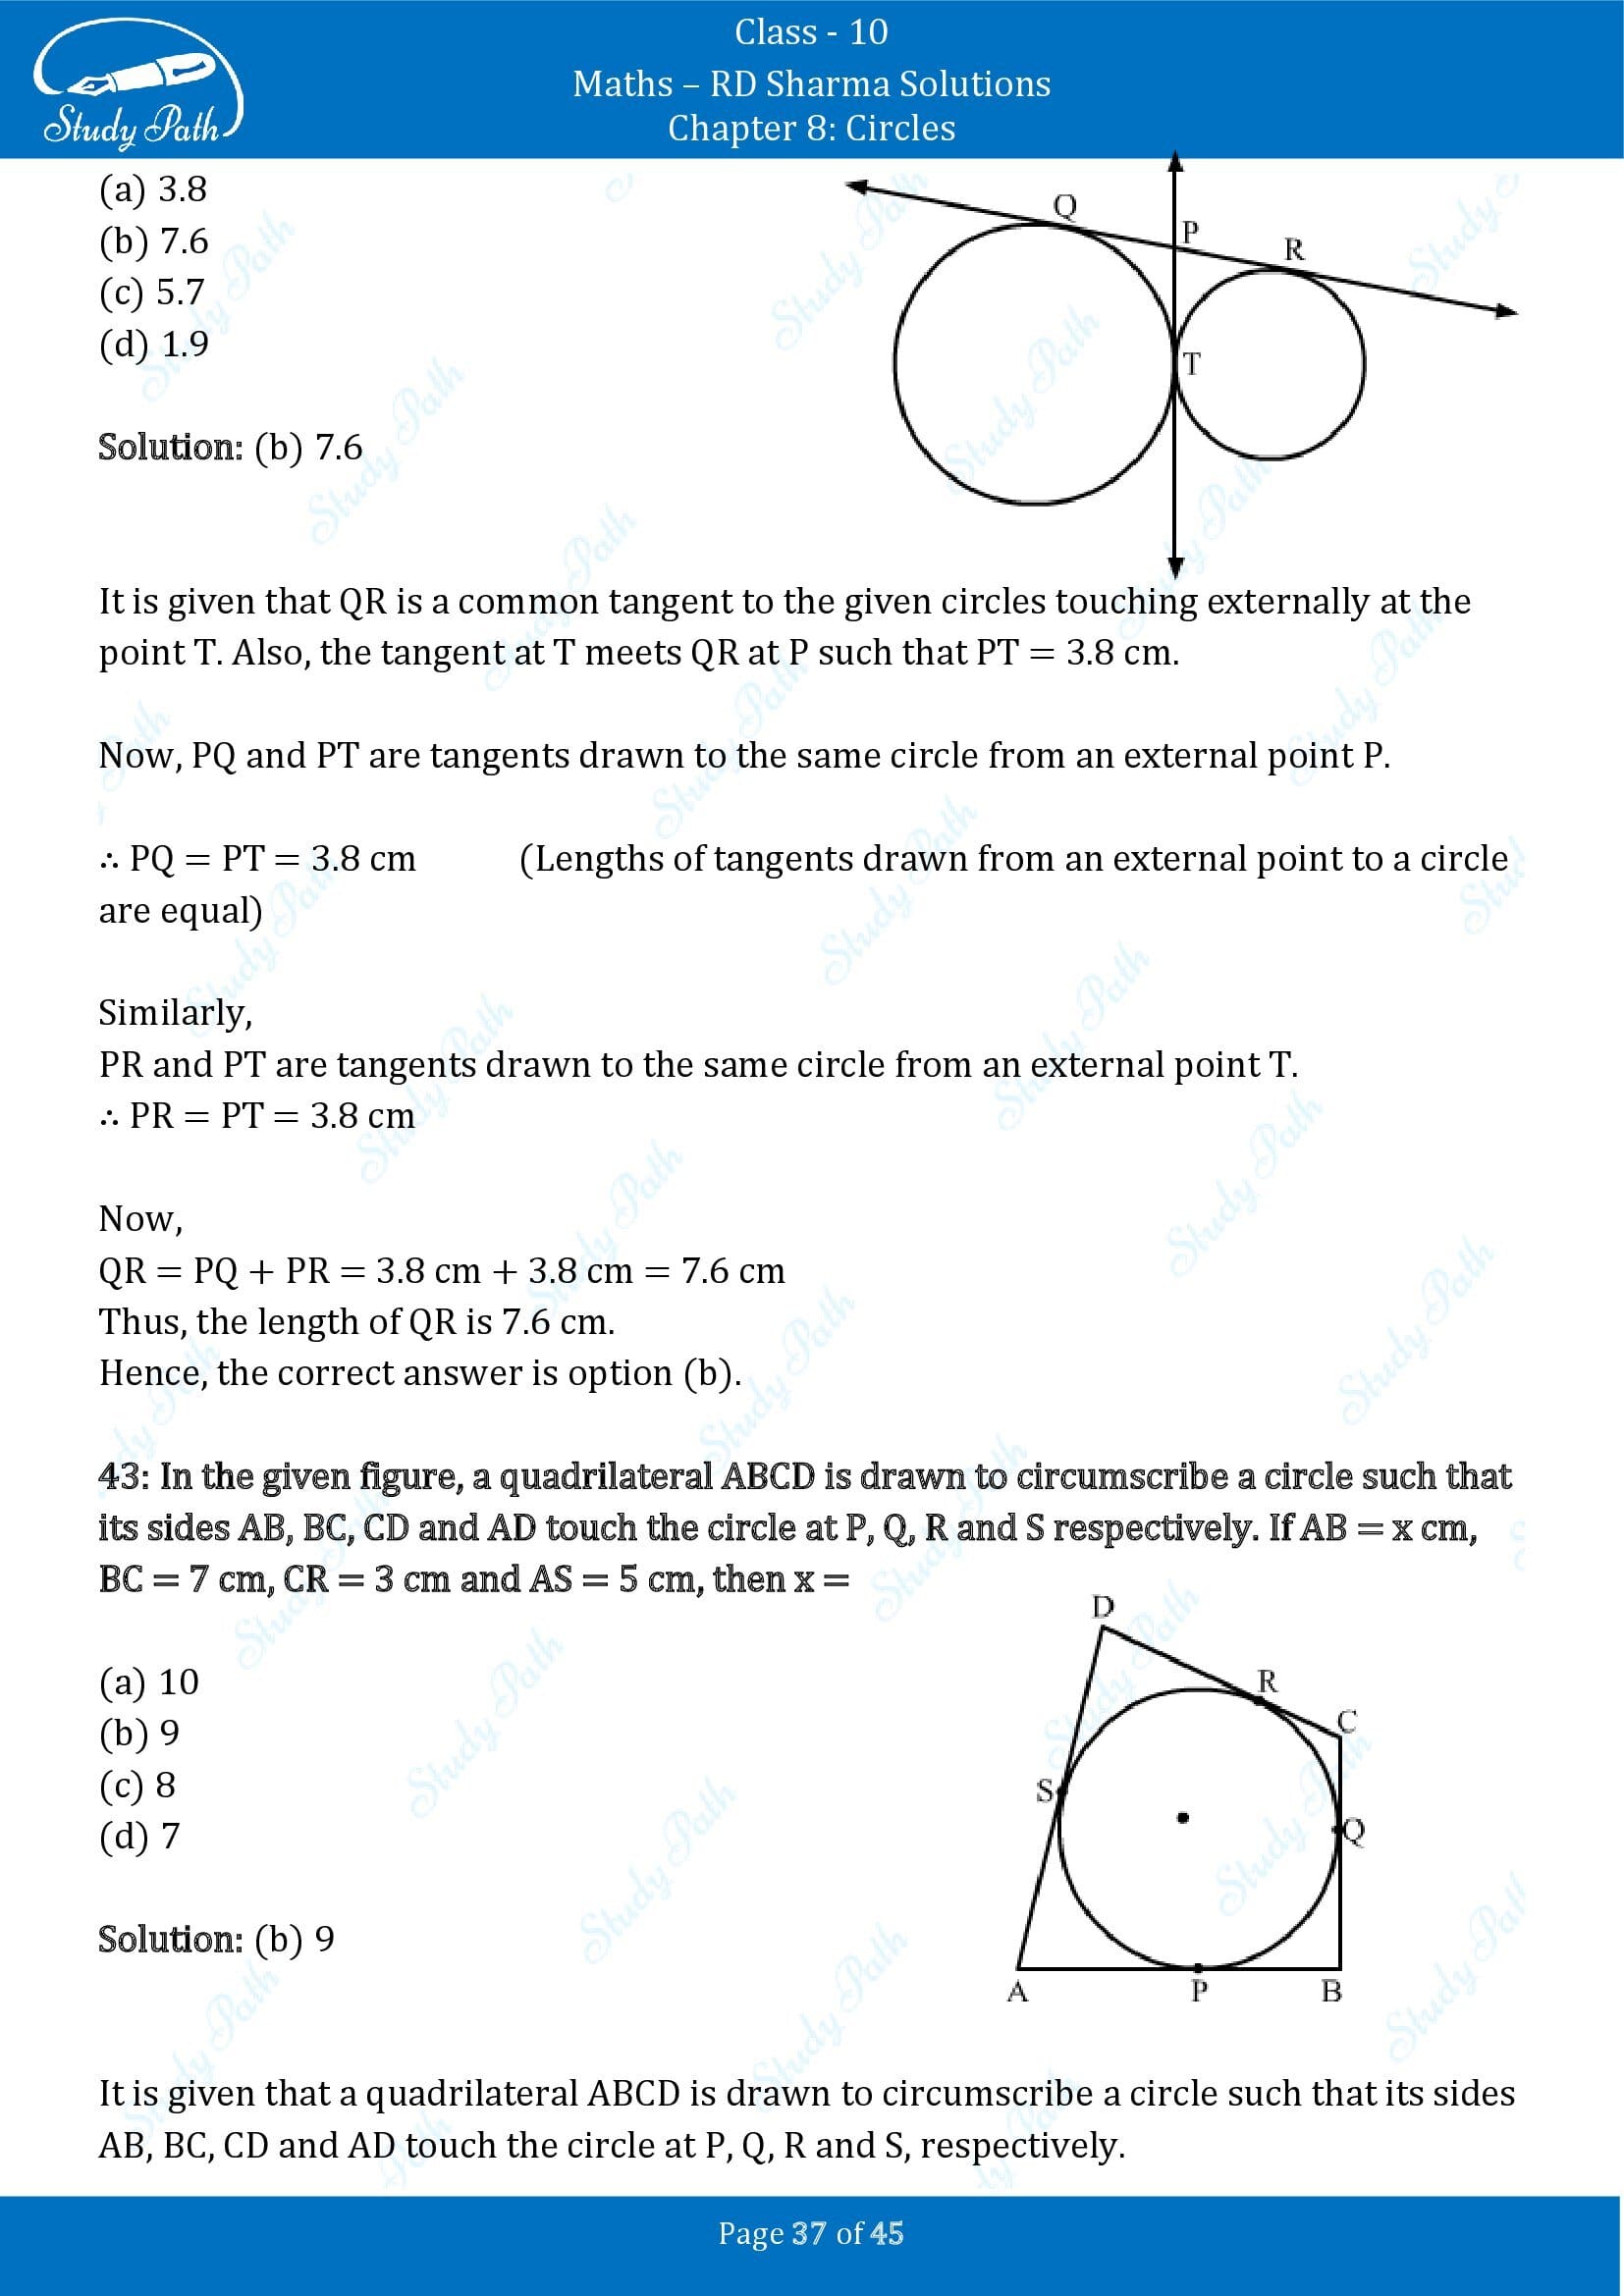 RD Sharma Solutions Class 10 Chapter 8 Circles Multiple Choice Questions MCQs 00037